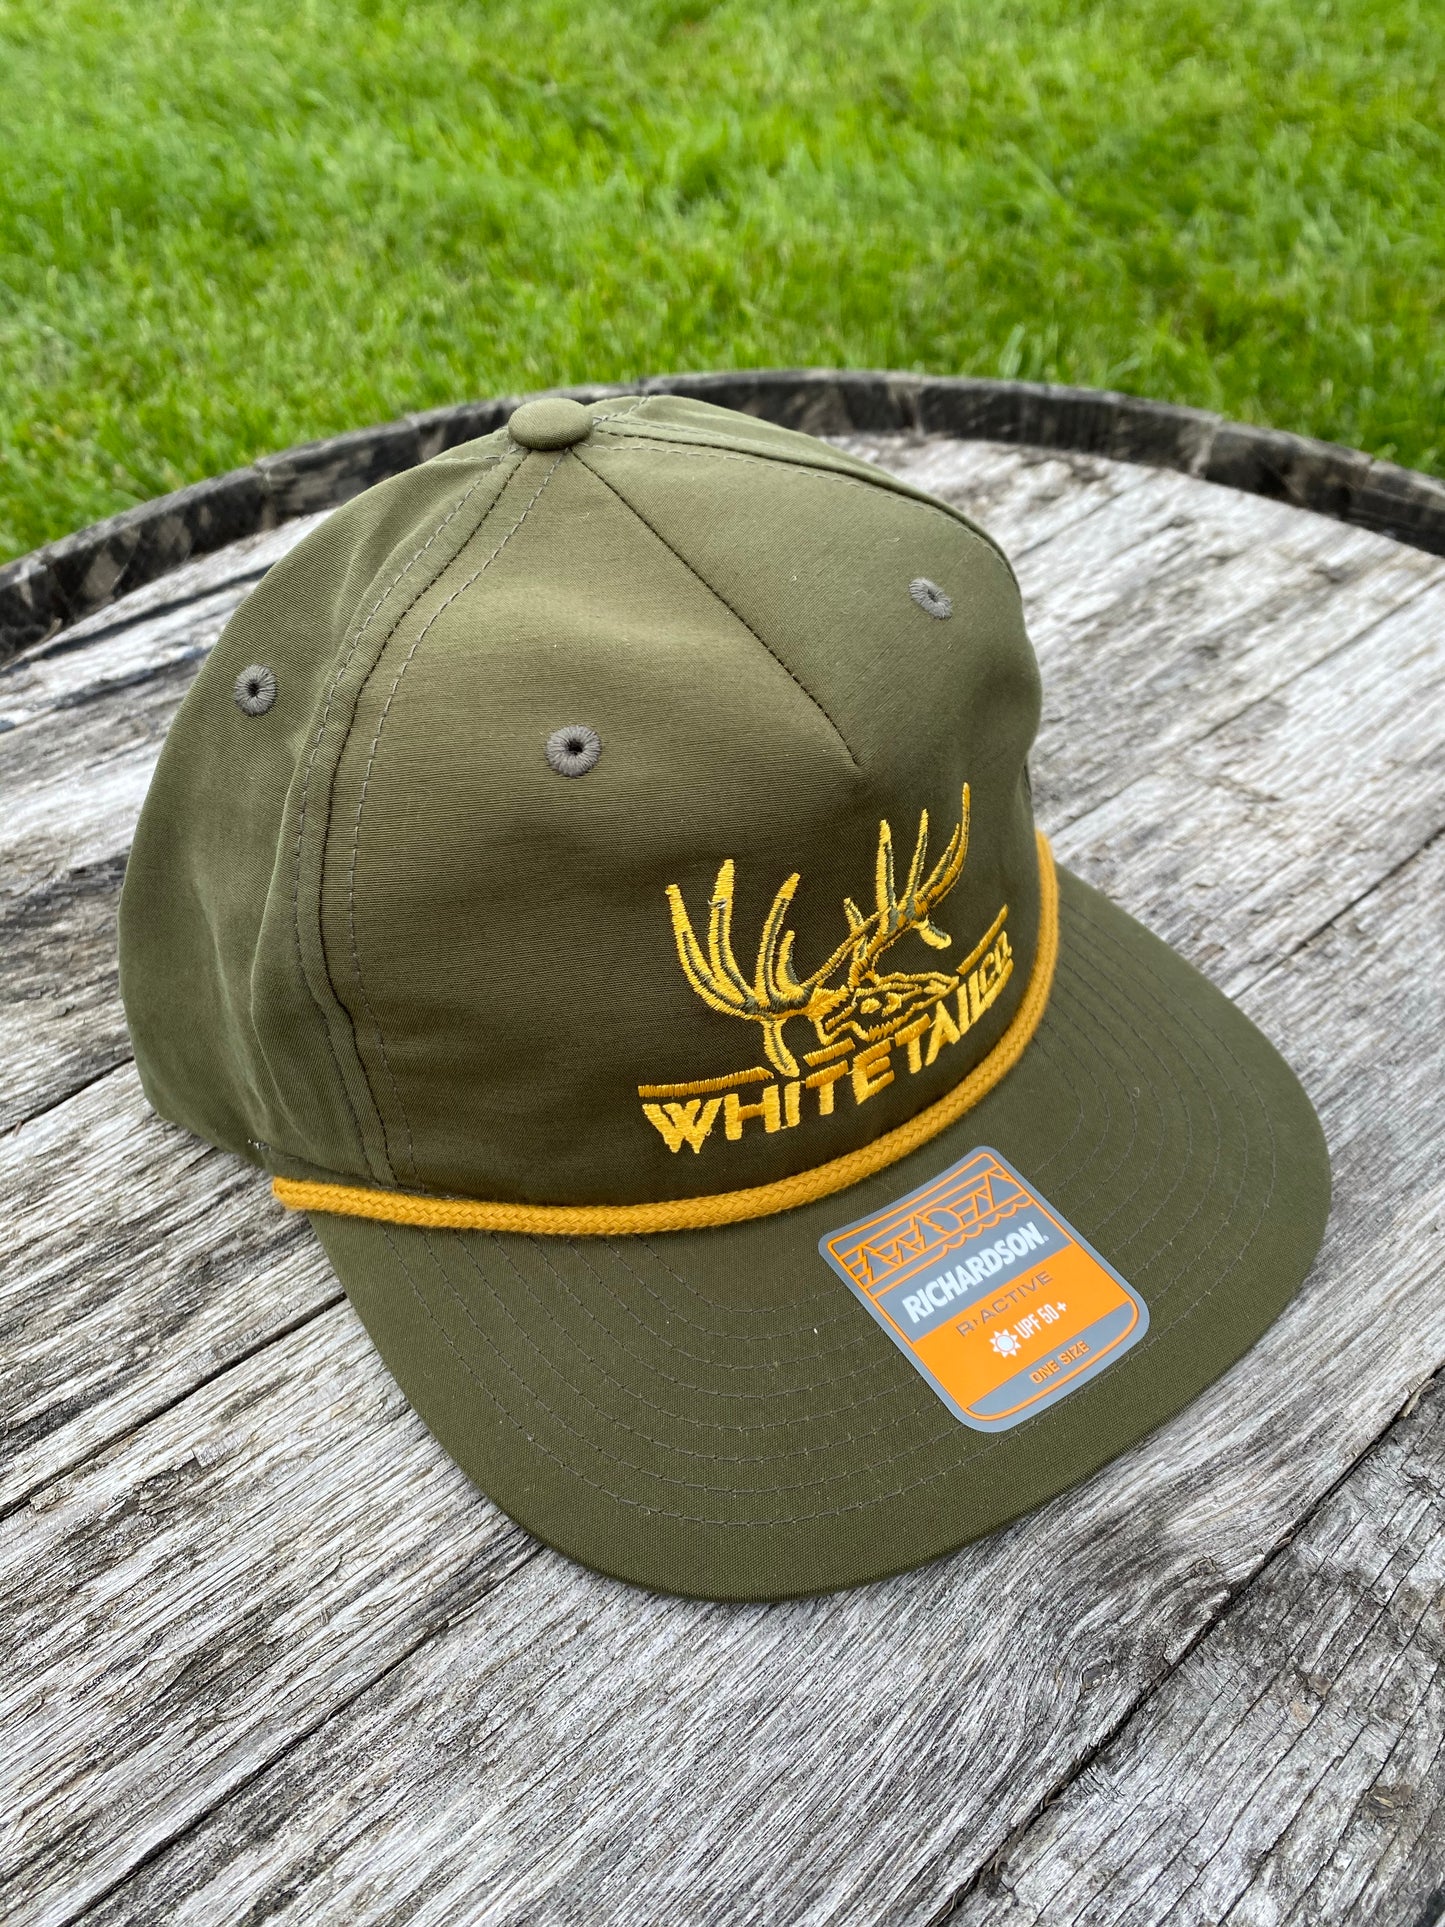 Whitetail Co. Richardson Rope Hat Loden/Gold